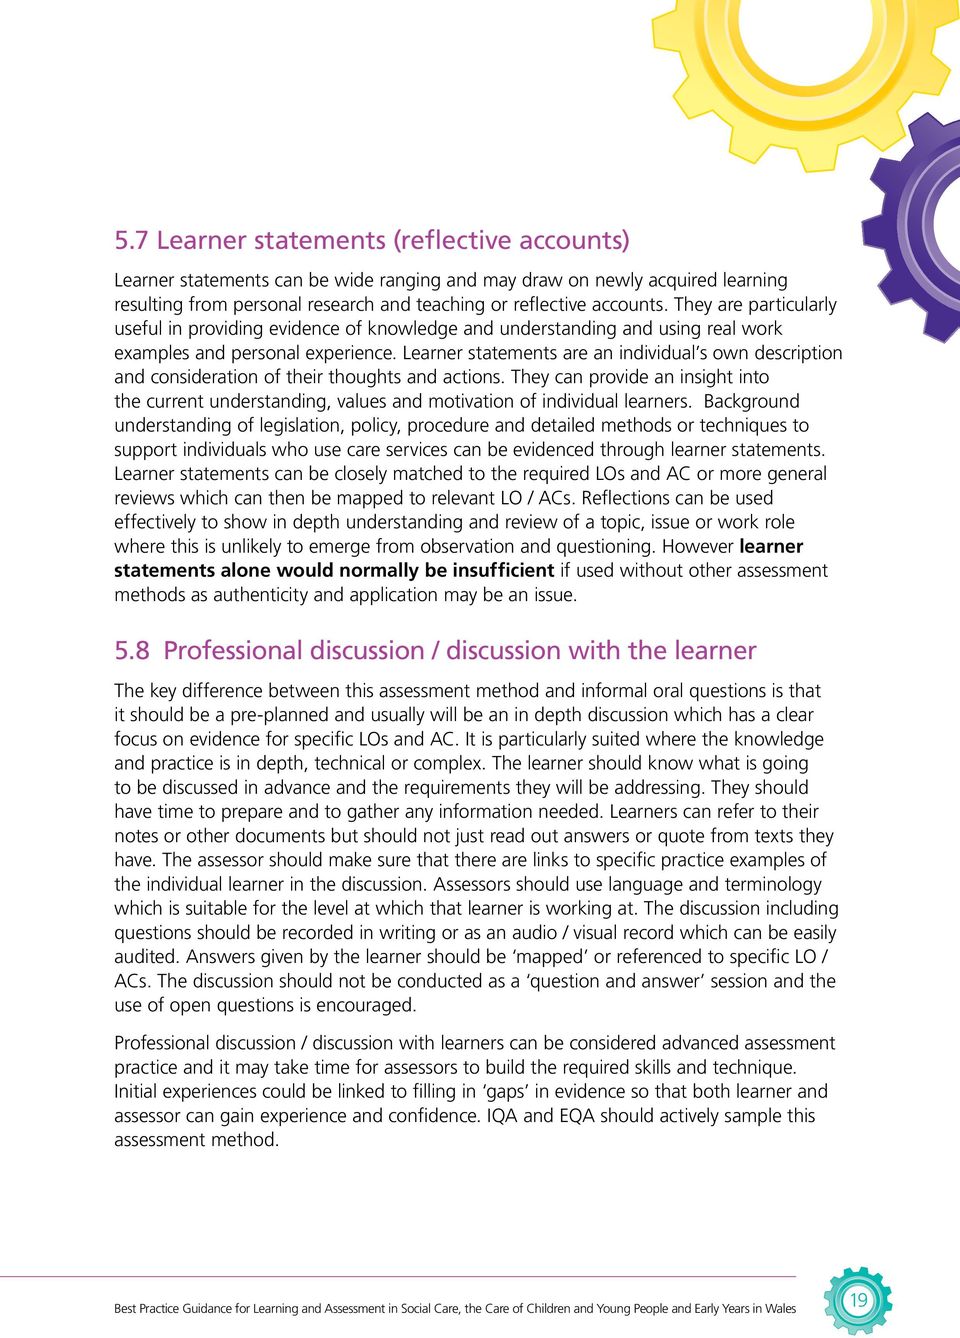 Learner statements are an individual s own description and consideration of their thoughts and actions.